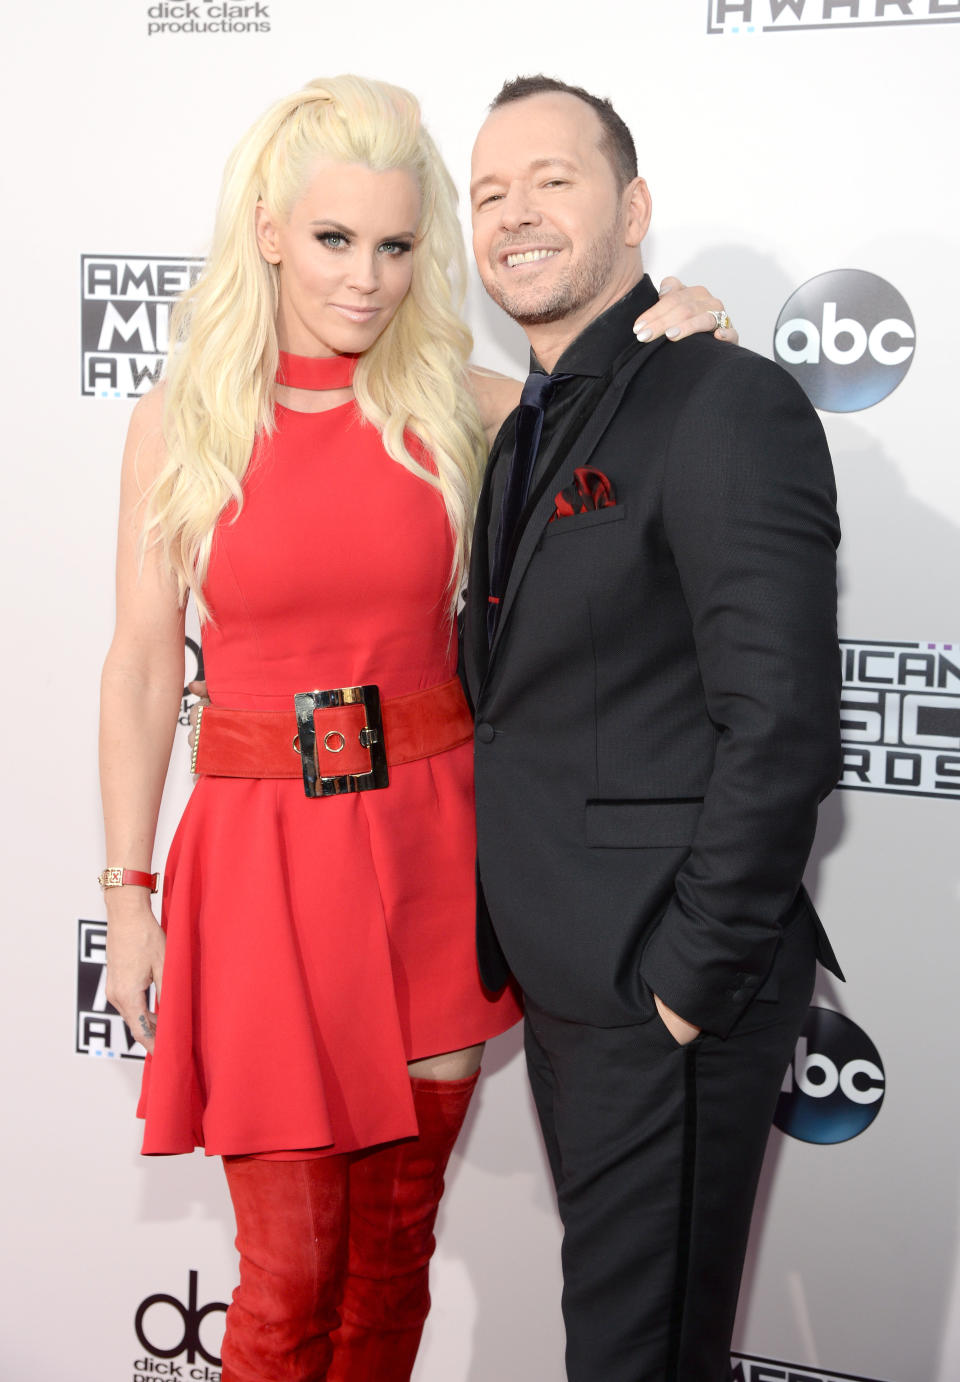 LOS ANGELES, CA - NOVEMBER 22: Jenny McCarthy and Donnie Wahlberg attend the 2015 American Music Awards at Microsoft Theater on November 22, 2015 in Los Angeles, California. (Photo by Kevin Mazur/AMA2015/WireImage)